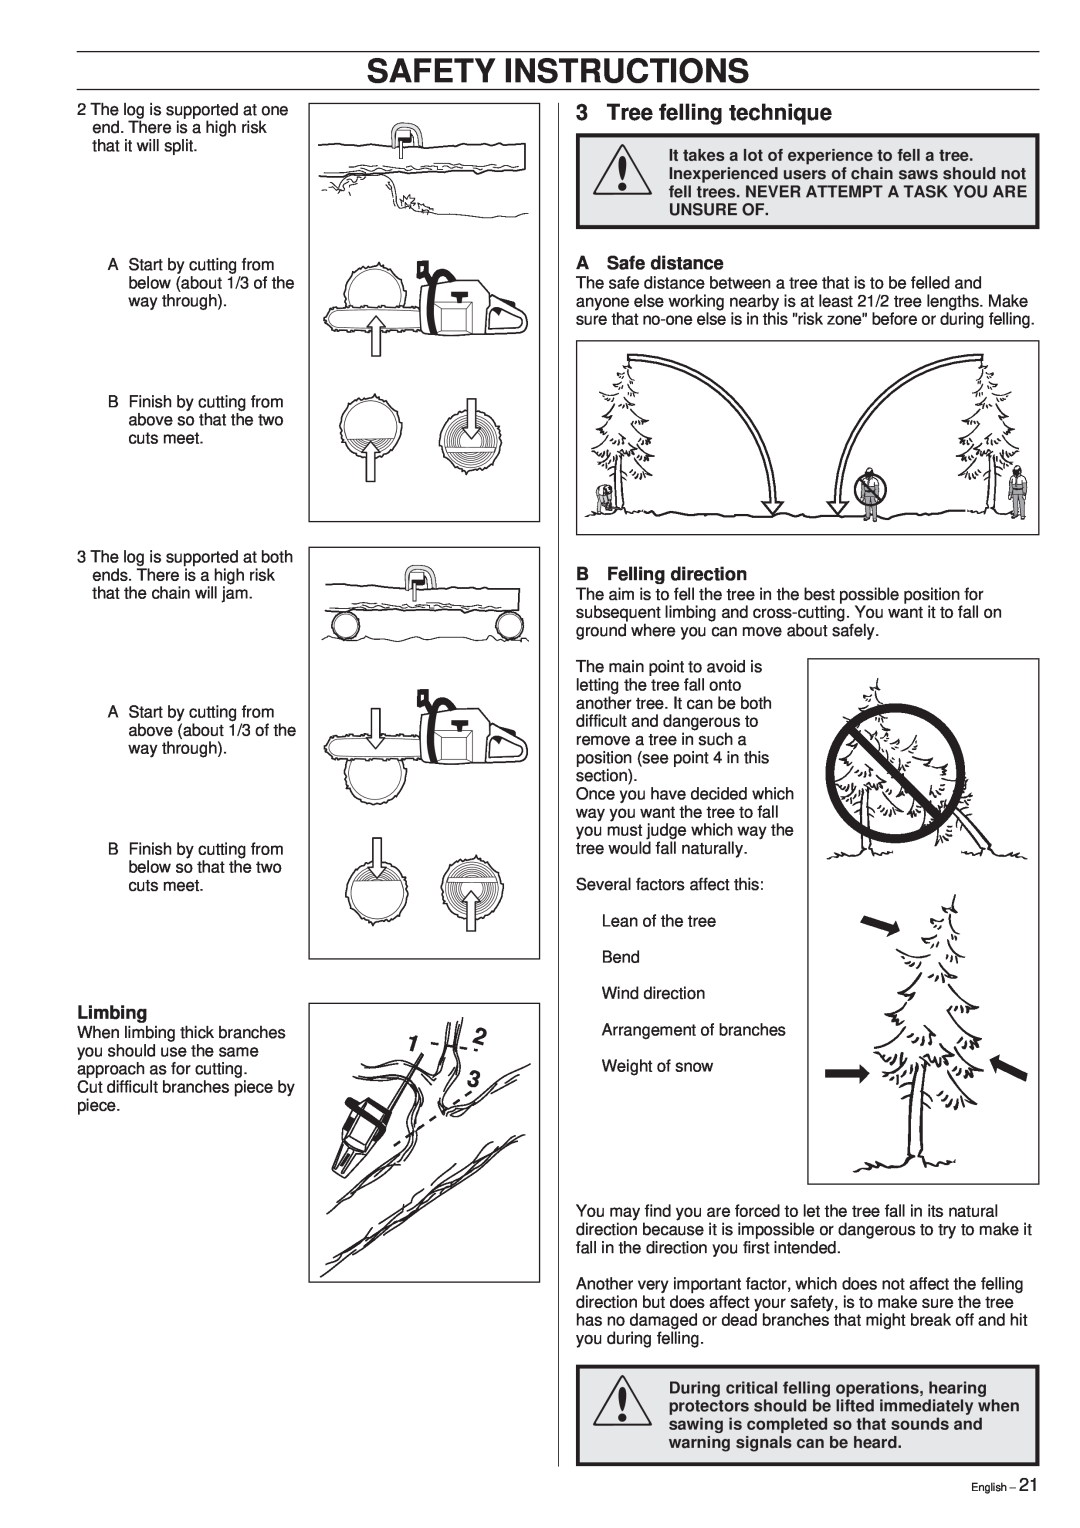 Husqvarna 394XP manual Safety Instructions, 3Tree felling technique, A Safe distance, Limbing, B Felling direction 